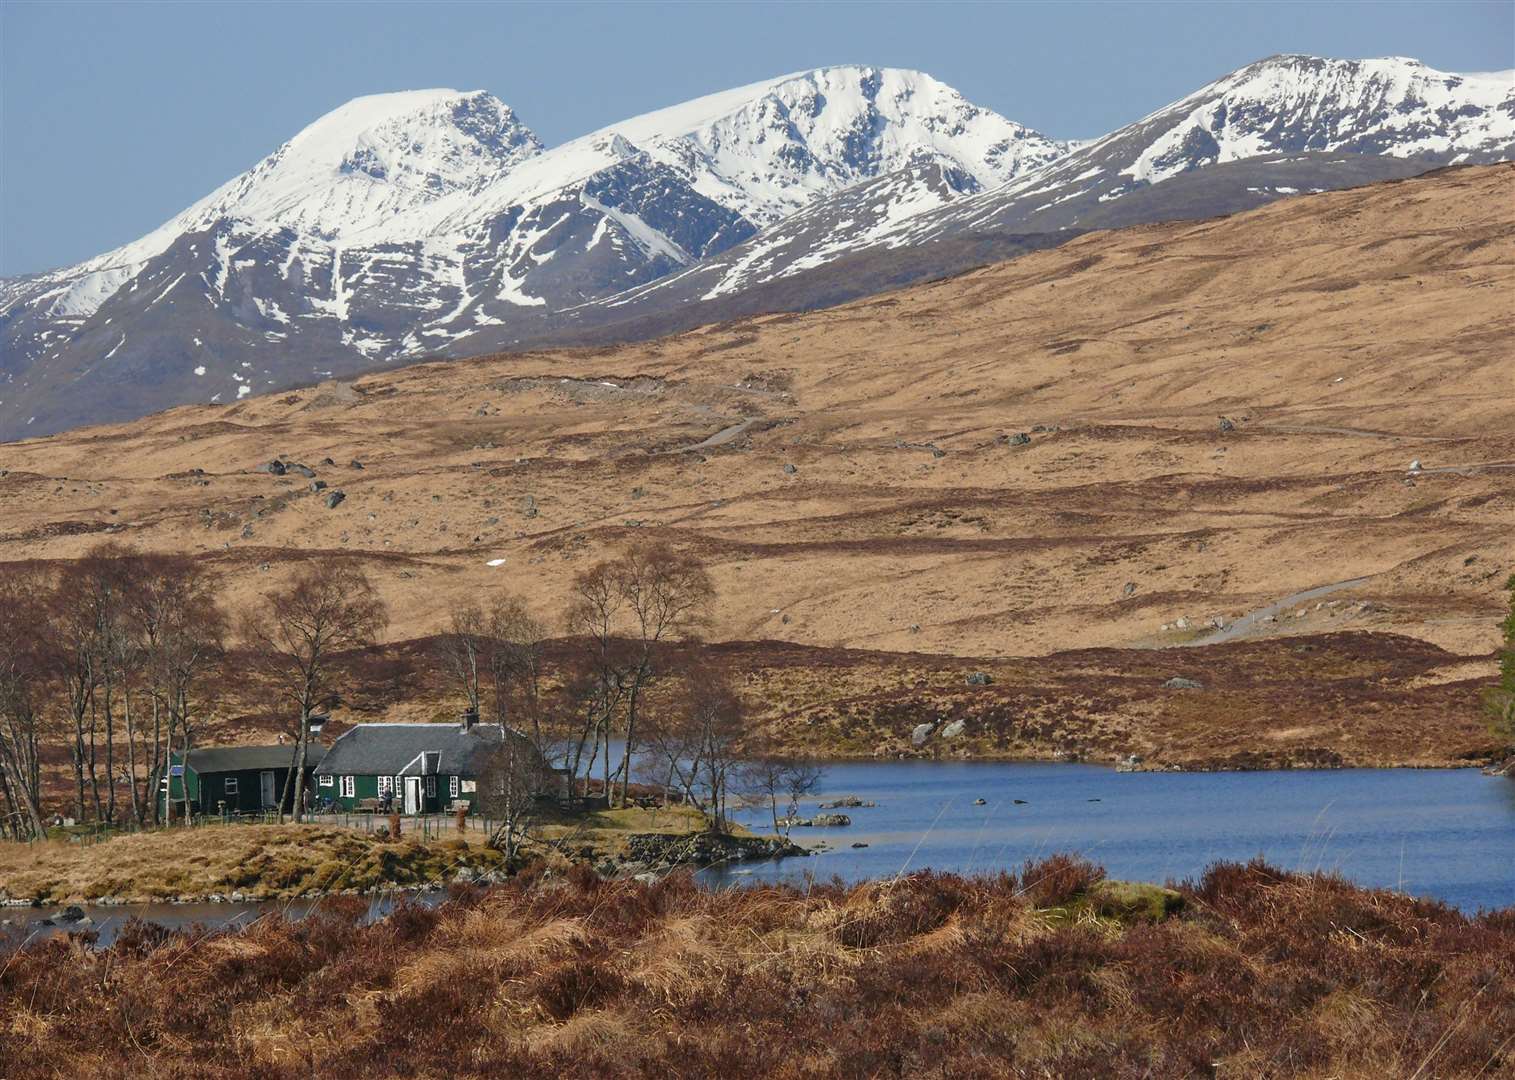 Loch Ossian is situated deep into the hills.